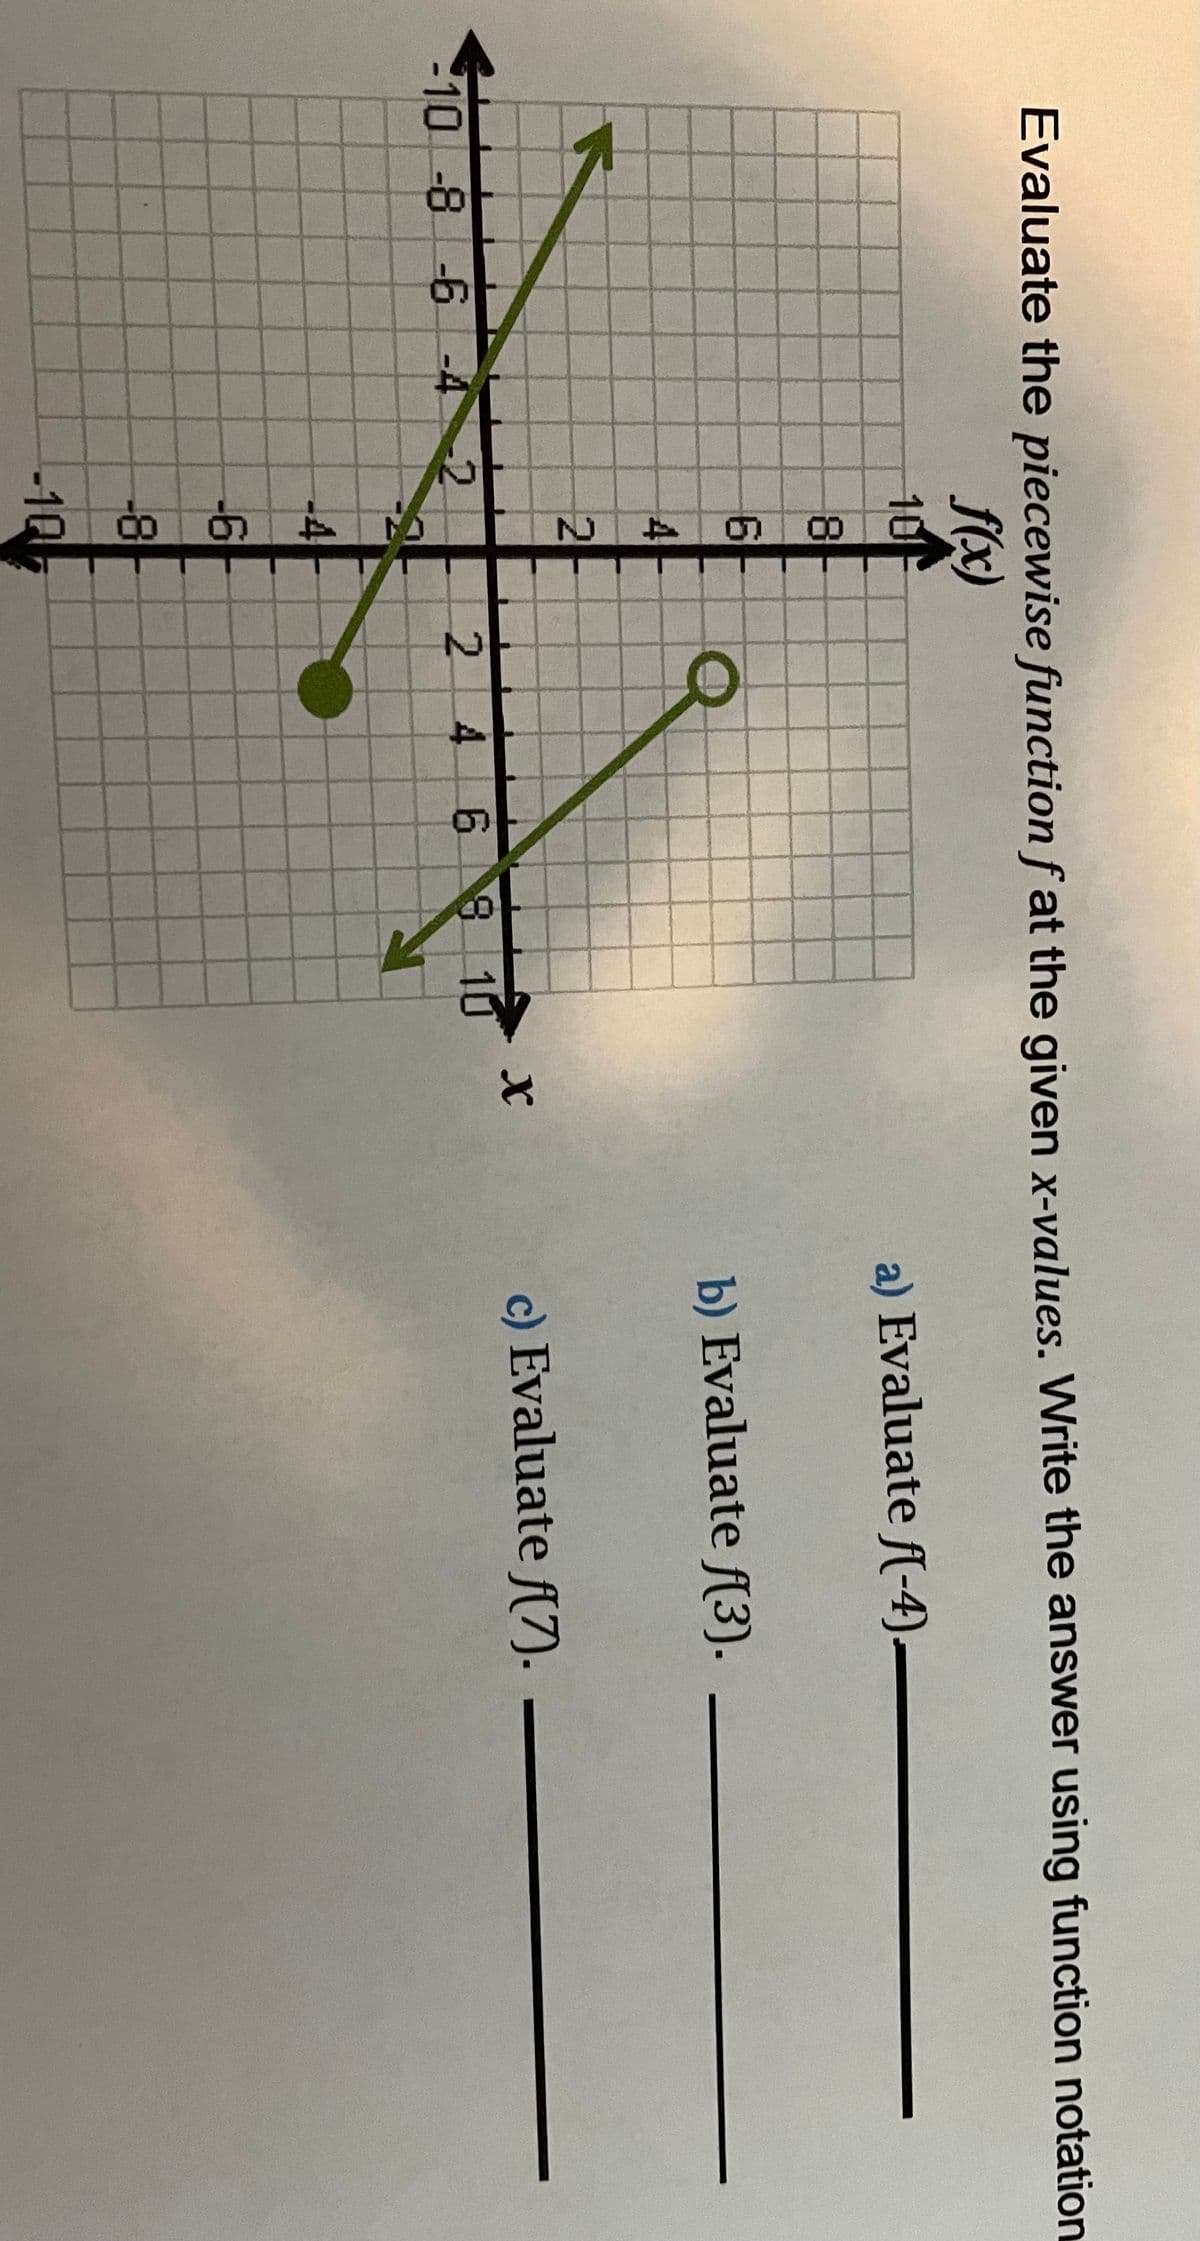 Evaluate the piecewise function f at the given x-values. Write the answer using function notation
f(x)
10
8
6
4
2
-10 -8 -6 -4
-2
4
-6
-8
-10
0:0
Q
2
4 6 8 10
TO
X
a) Evaluate f(-4)—
b) Evaluate f(3).
c) Evaluate f(7).